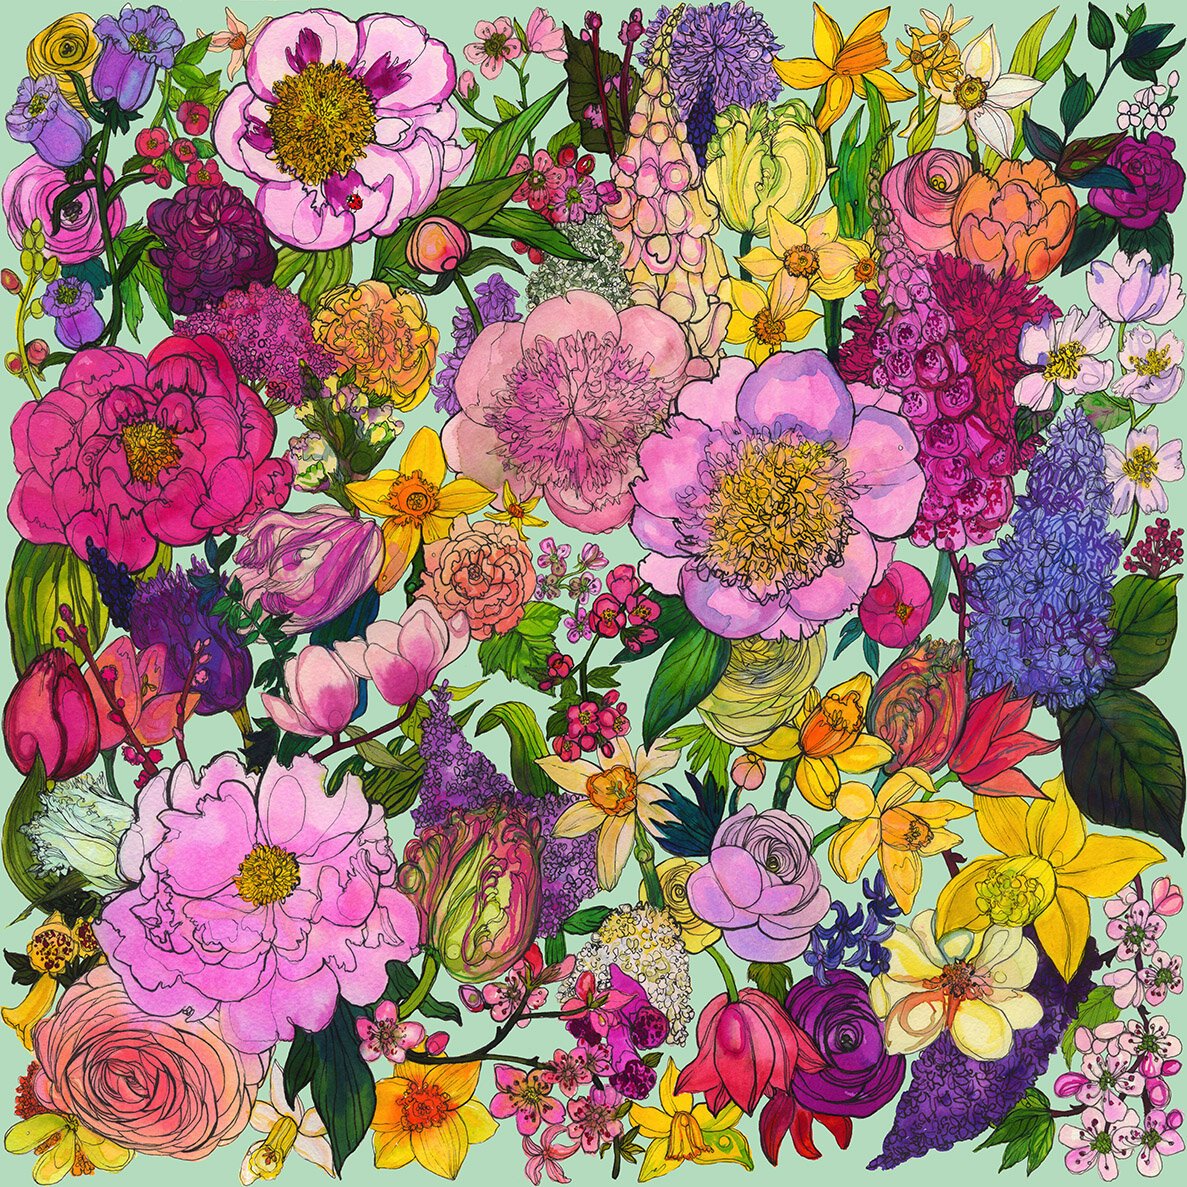 Spring Floral Watercolour Illustration by Marcella Wylie 